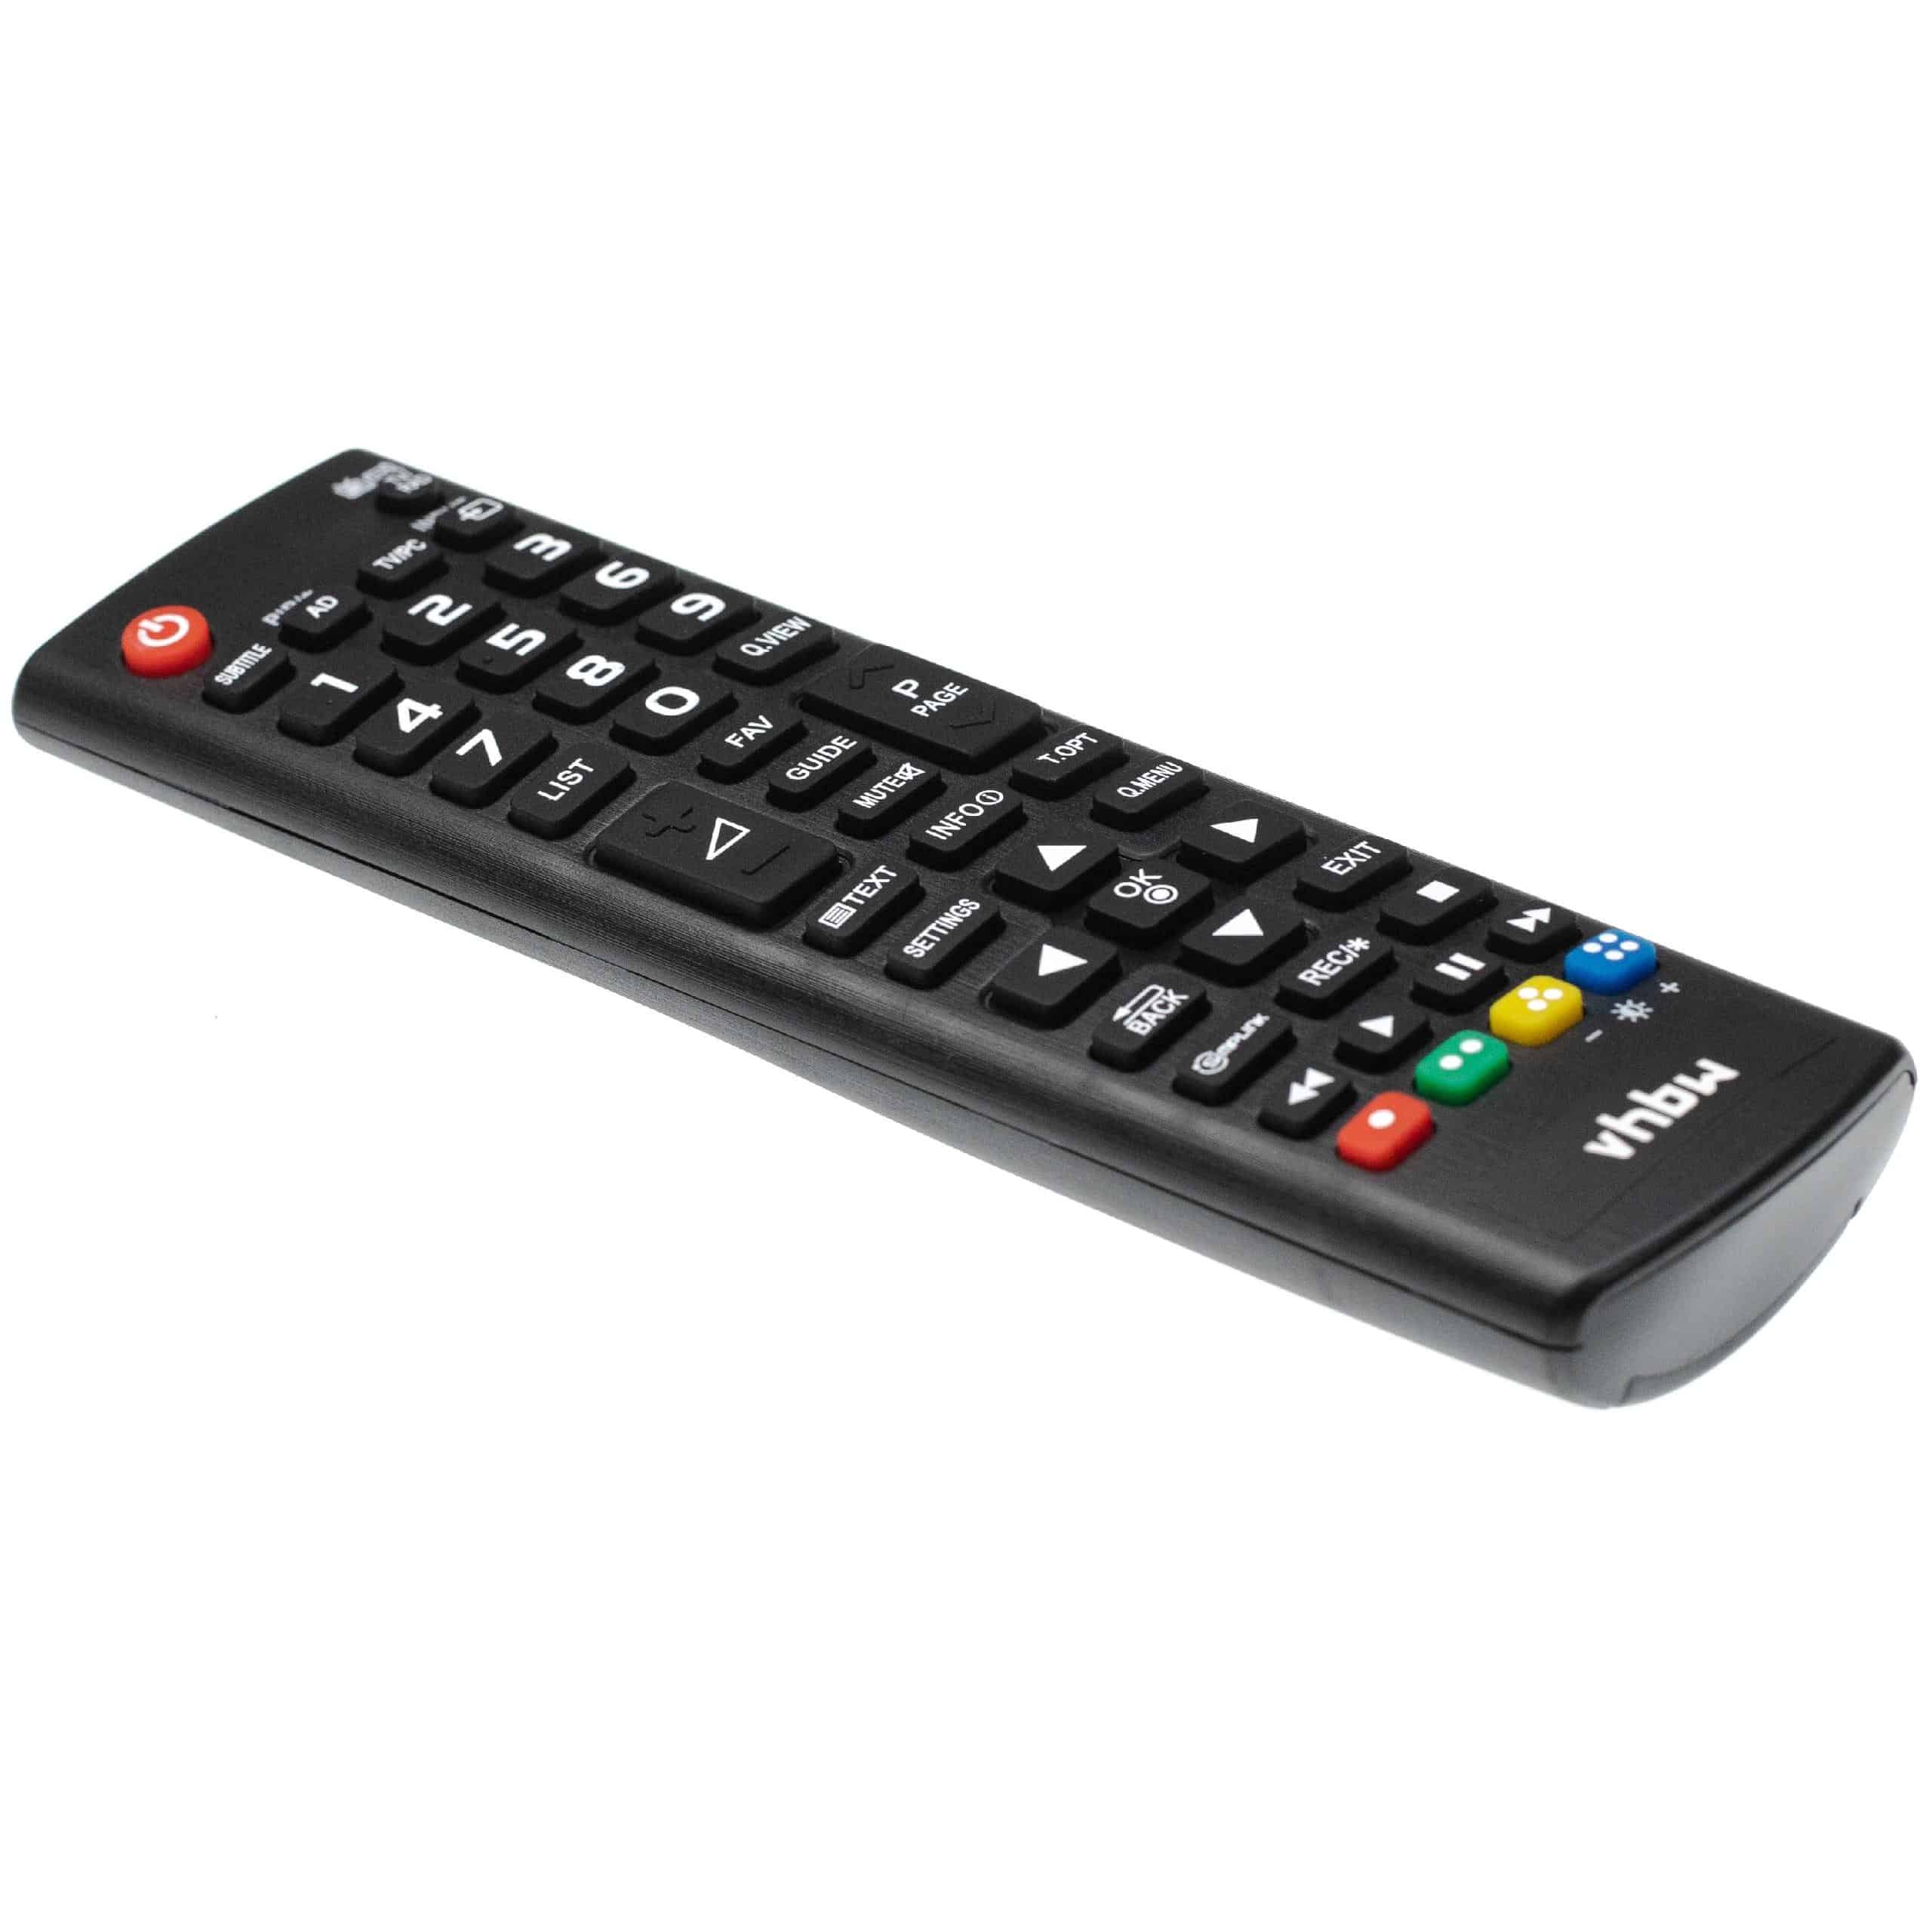 Remote Control replaces LG AKB73715686 for LG TV